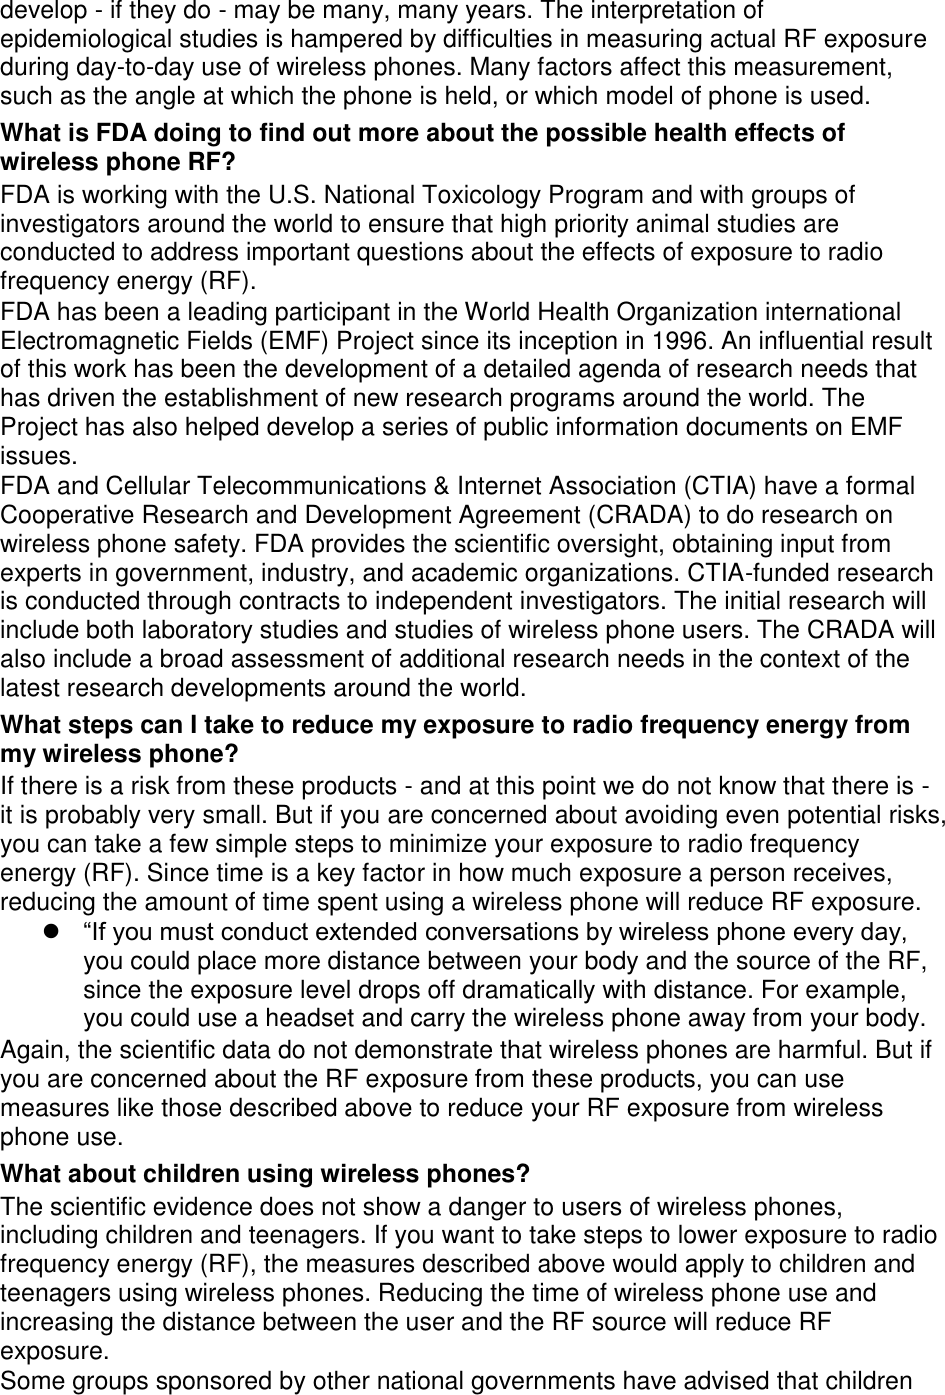 develop - if they do - may be many, many years. The interpretation of epidemiological studies is hampered by difficulties in measuring actual RF exposure during day-to-day use of wireless phones. Many factors affect this measurement, such as the angle at which the phone is held, or which model of phone is used. What is FDA doing to find out more about the possible health effects of wireless phone RF? FDA is working with the U.S. National Toxicology Program and with groups of investigators around the world to ensure that high priority animal studies are conducted to address important questions about the effects of exposure to radio frequency energy (RF). FDA has been a leading participant in the World Health Organization international Electromagnetic Fields (EMF) Project since its inception in 1996. An influential result of this work has been the development of a detailed agenda of research needs that has driven the establishment of new research programs around the world. The Project has also helped develop a series of public information documents on EMF issues. FDA and Cellular Telecommunications &amp; Internet Association (CTIA) have a formal Cooperative Research and Development Agreement (CRADA) to do research on wireless phone safety. FDA provides the scientific oversight, obtaining input from experts in government, industry, and academic organizations. CTIA-funded research is conducted through contracts to independent investigators. The initial research will include both laboratory studies and studies of wireless phone users. The CRADA will also include a broad assessment of additional research needs in the context of the latest research developments around the world. What steps can I take to reduce my exposure to radio frequency energy from my wireless phone? If there is a risk from these products - and at this point we do not know that there is - it is probably very small. But if you are concerned about avoiding even potential risks, you can take a few simple steps to minimize your exposure to radio frequency energy (RF). Since time is a key factor in how much exposure a person receives, reducing the amount of time spent using a wireless phone will reduce RF exposure.  “If you must conduct extended conversations by wireless phone every day, you could place more distance between your body and the source of the RF, since the exposure level drops off dramatically with distance. For example, you could use a headset and carry the wireless phone away from your body. Again, the scientific data do not demonstrate that wireless phones are harmful. But if you are concerned about the RF exposure from these products, you can use measures like those described above to reduce your RF exposure from wireless phone use. What about children using wireless phones? The scientific evidence does not show a danger to users of wireless phones, including children and teenagers. If you want to take steps to lower exposure to radio frequency energy (RF), the measures described above would apply to children and teenagers using wireless phones. Reducing the time of wireless phone use and increasing the distance between the user and the RF source will reduce RF exposure. Some groups sponsored by other national governments have advised that children 